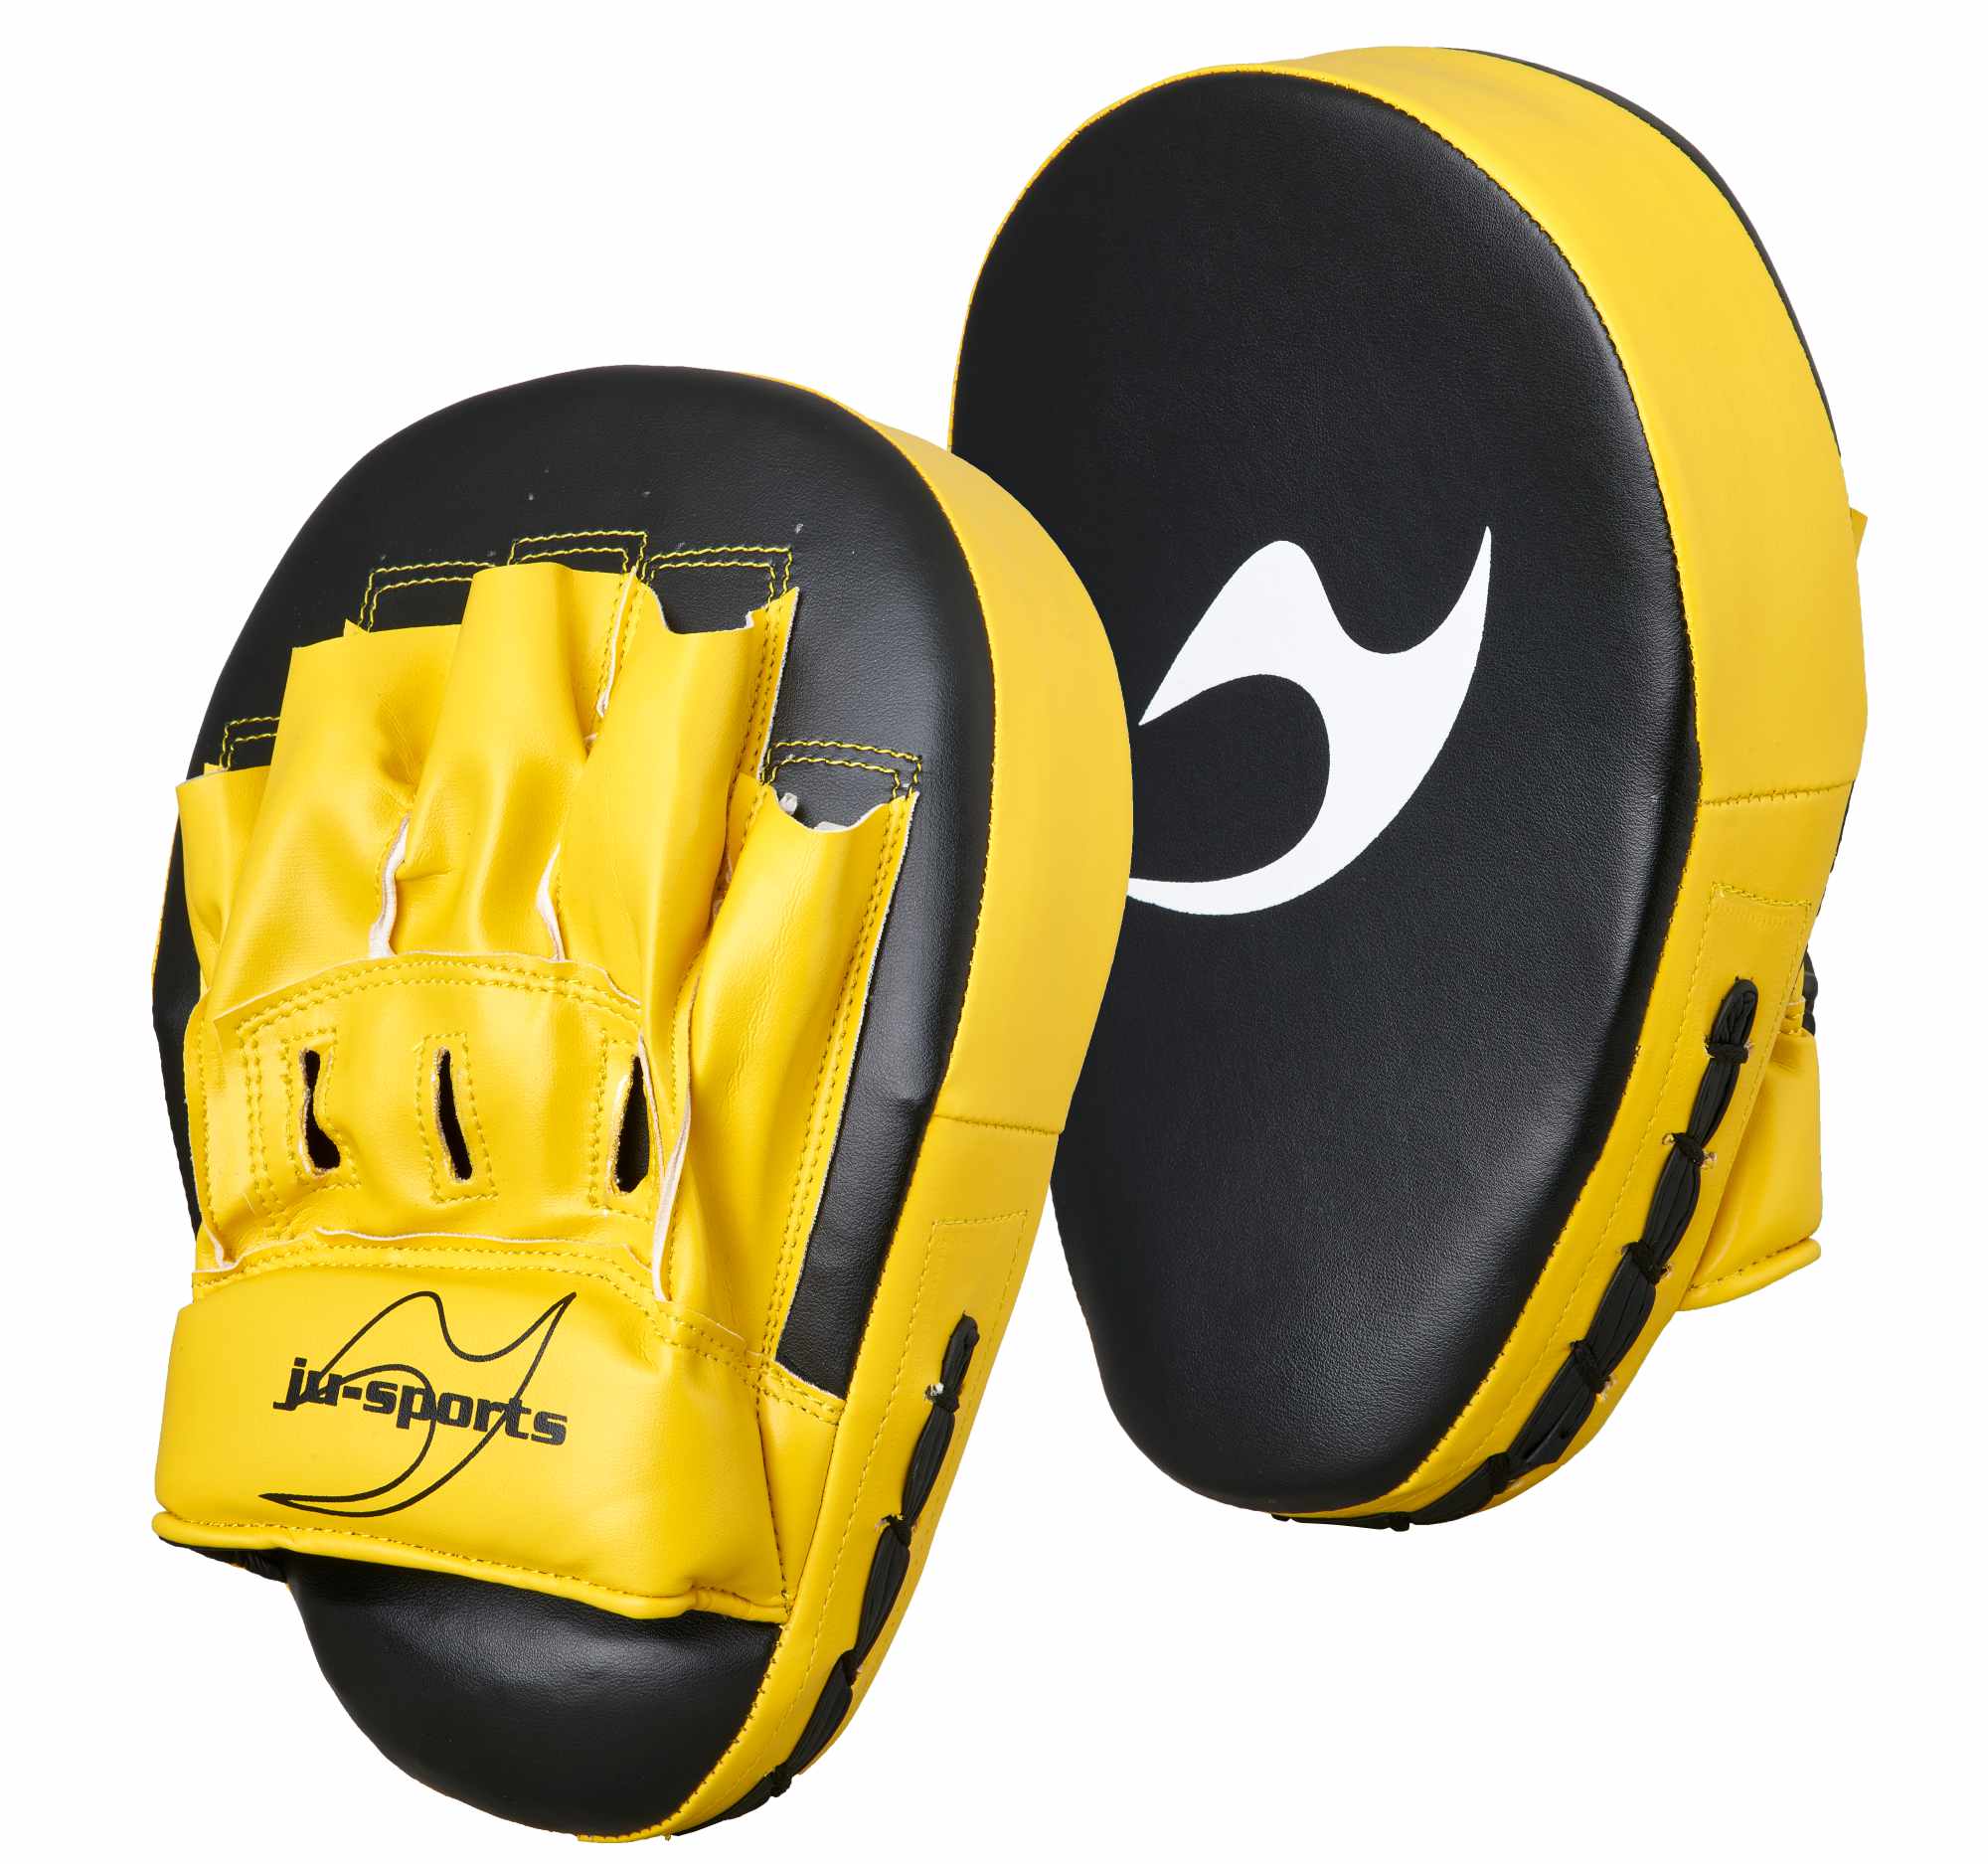 Ju-Sports Focus Mitts Curved